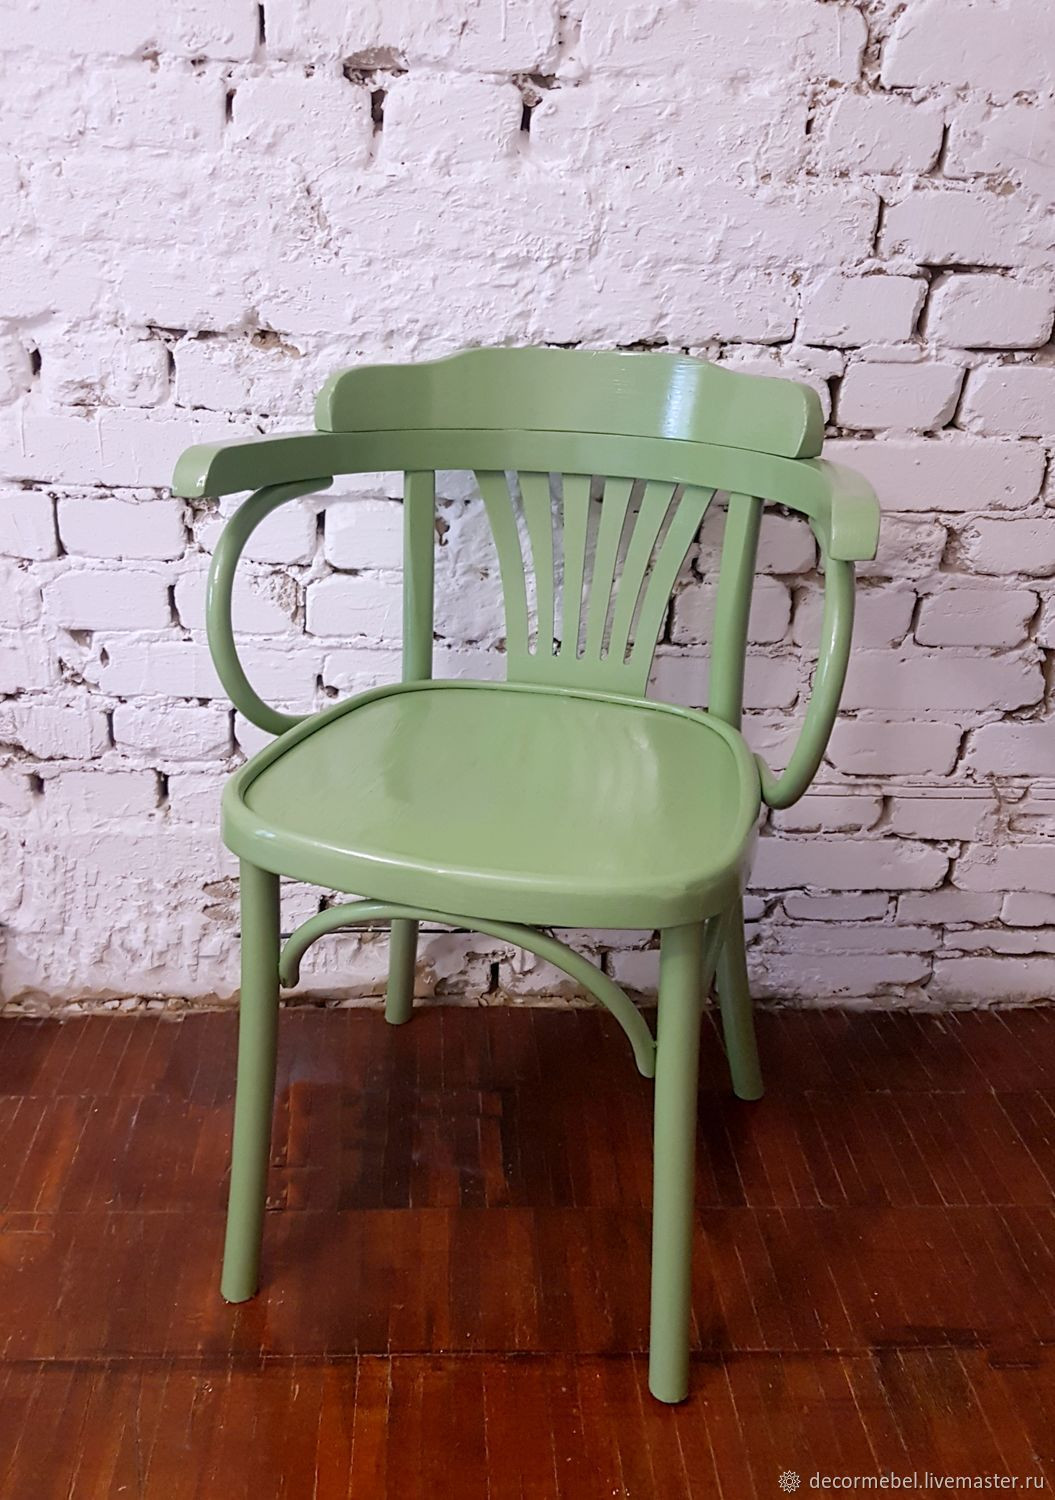 vintage hardwood flooring prices of thonet armchair white shop online on livemaster with shipping with furniture handmade livemaster handmade buy thonet armchair white vintage interior